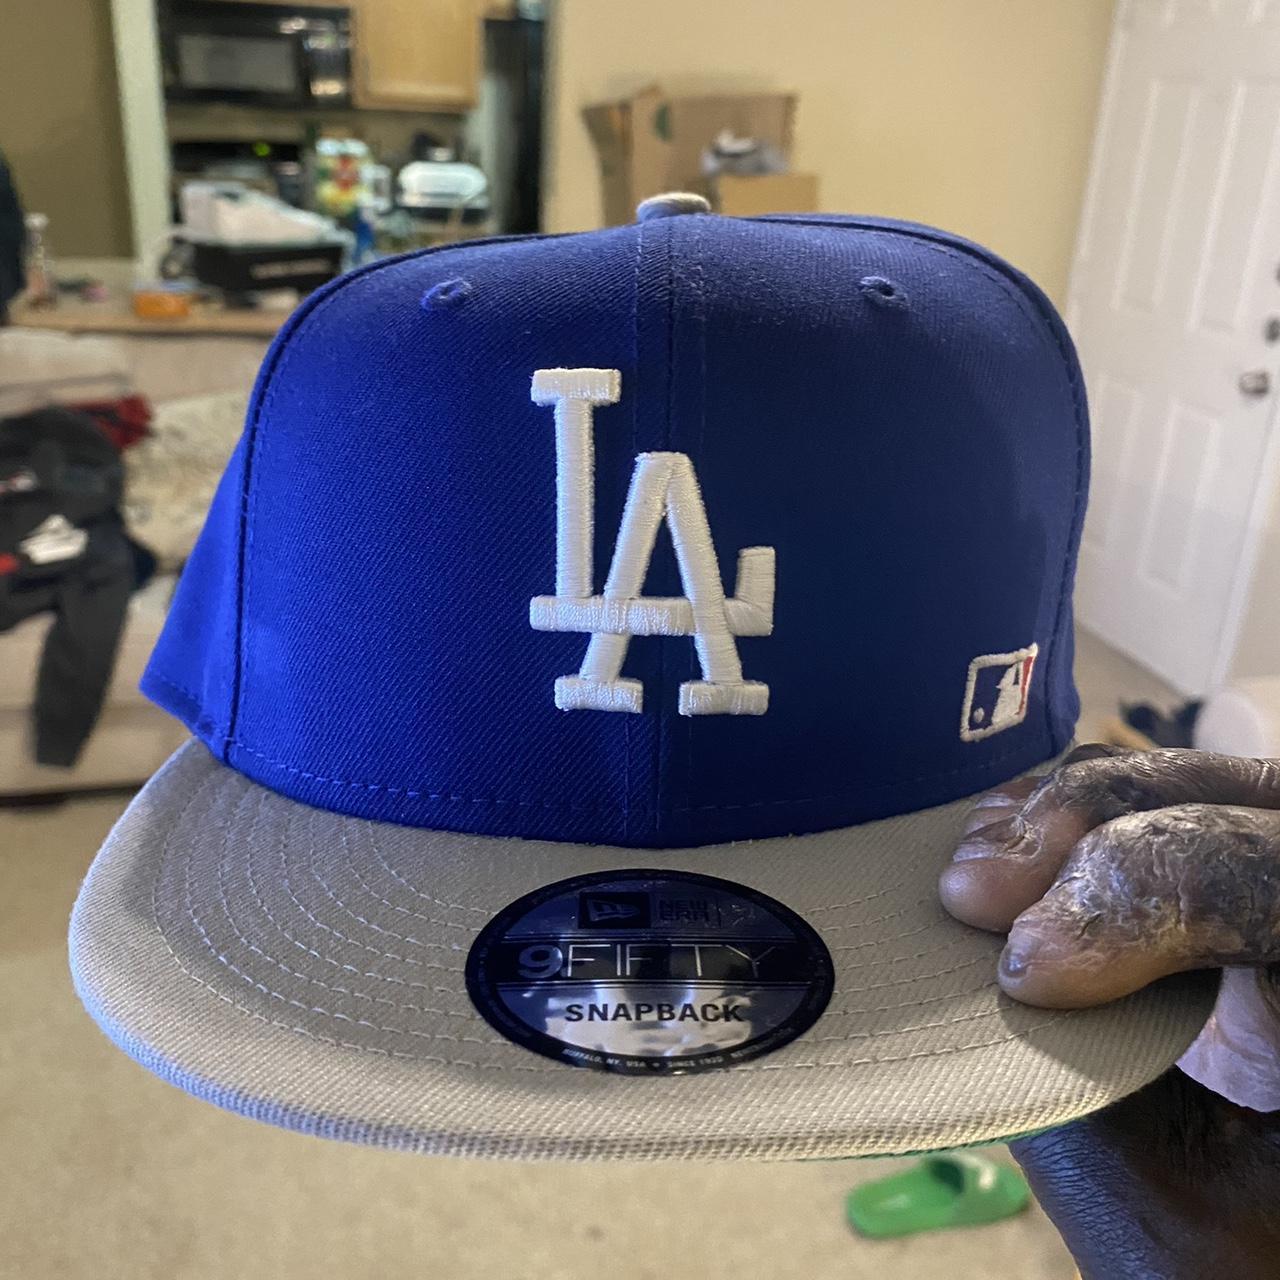 New Era Backletter Arch 9FIFTY Los Angeles Dodgers Snapback Hat